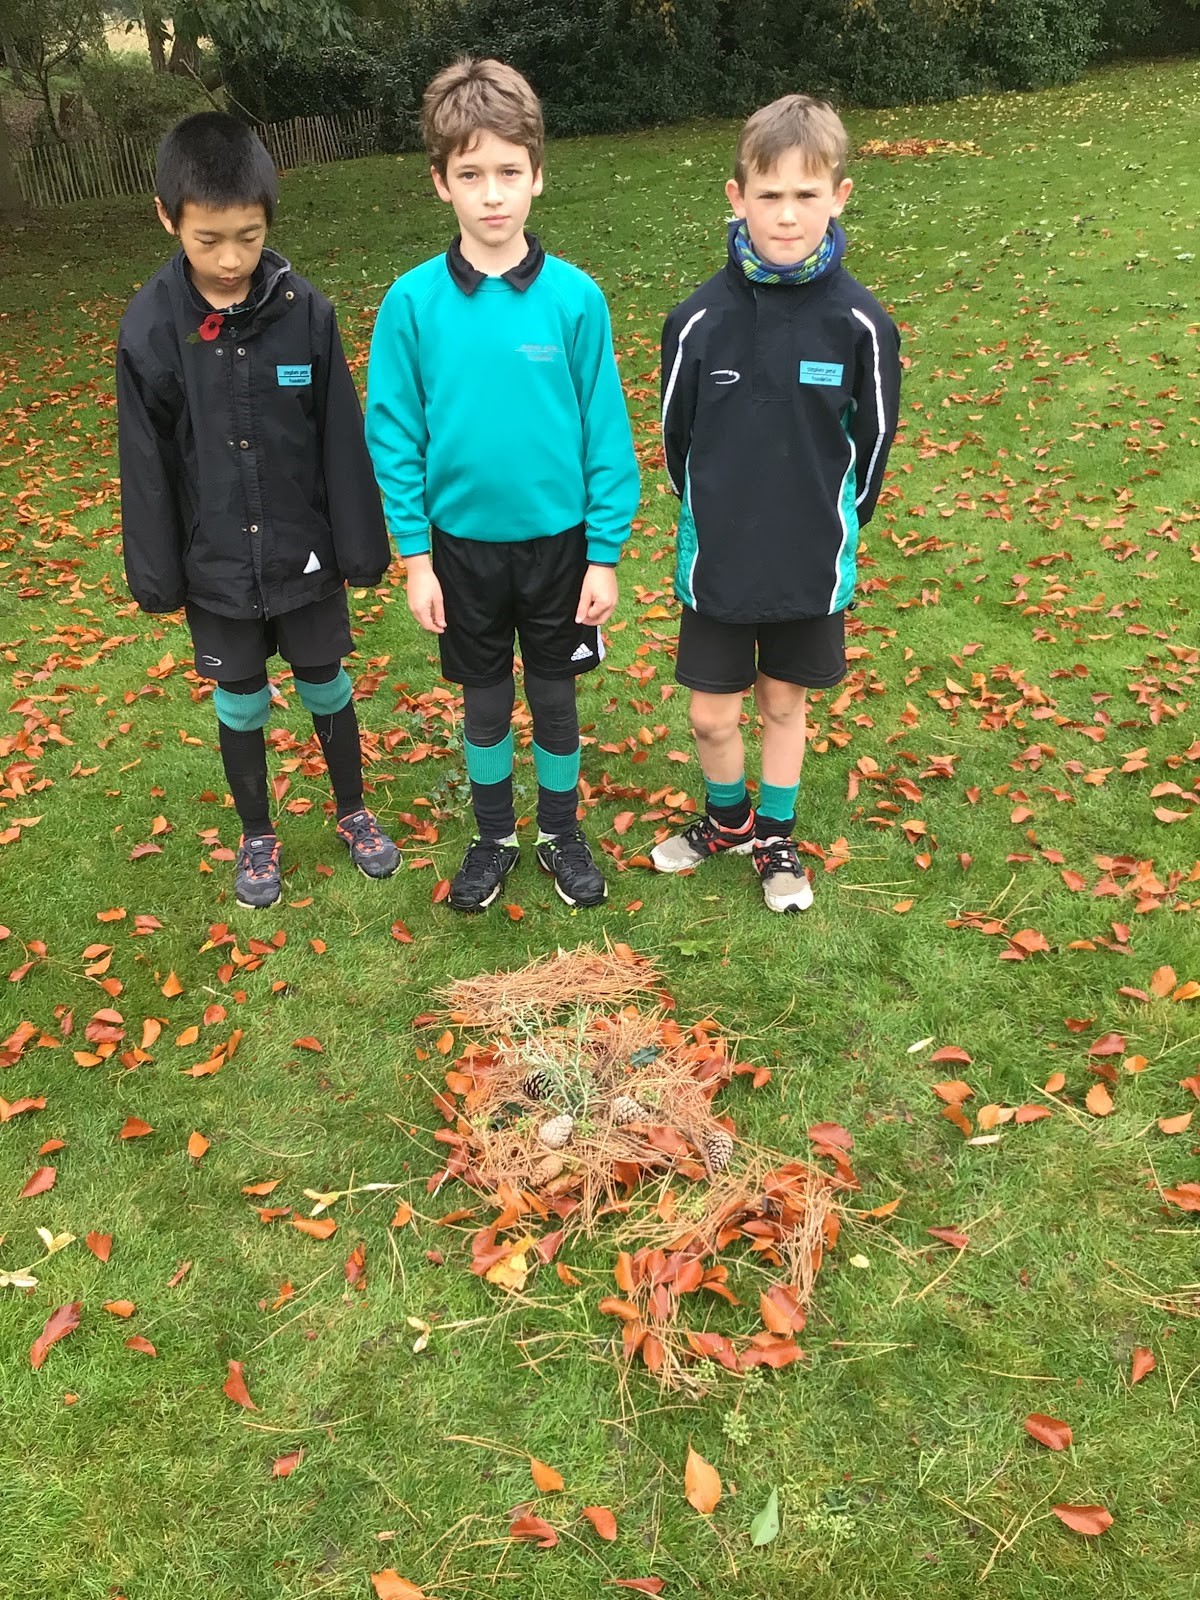 Year 6 pupils with their art installation inspired by Remembrance Day